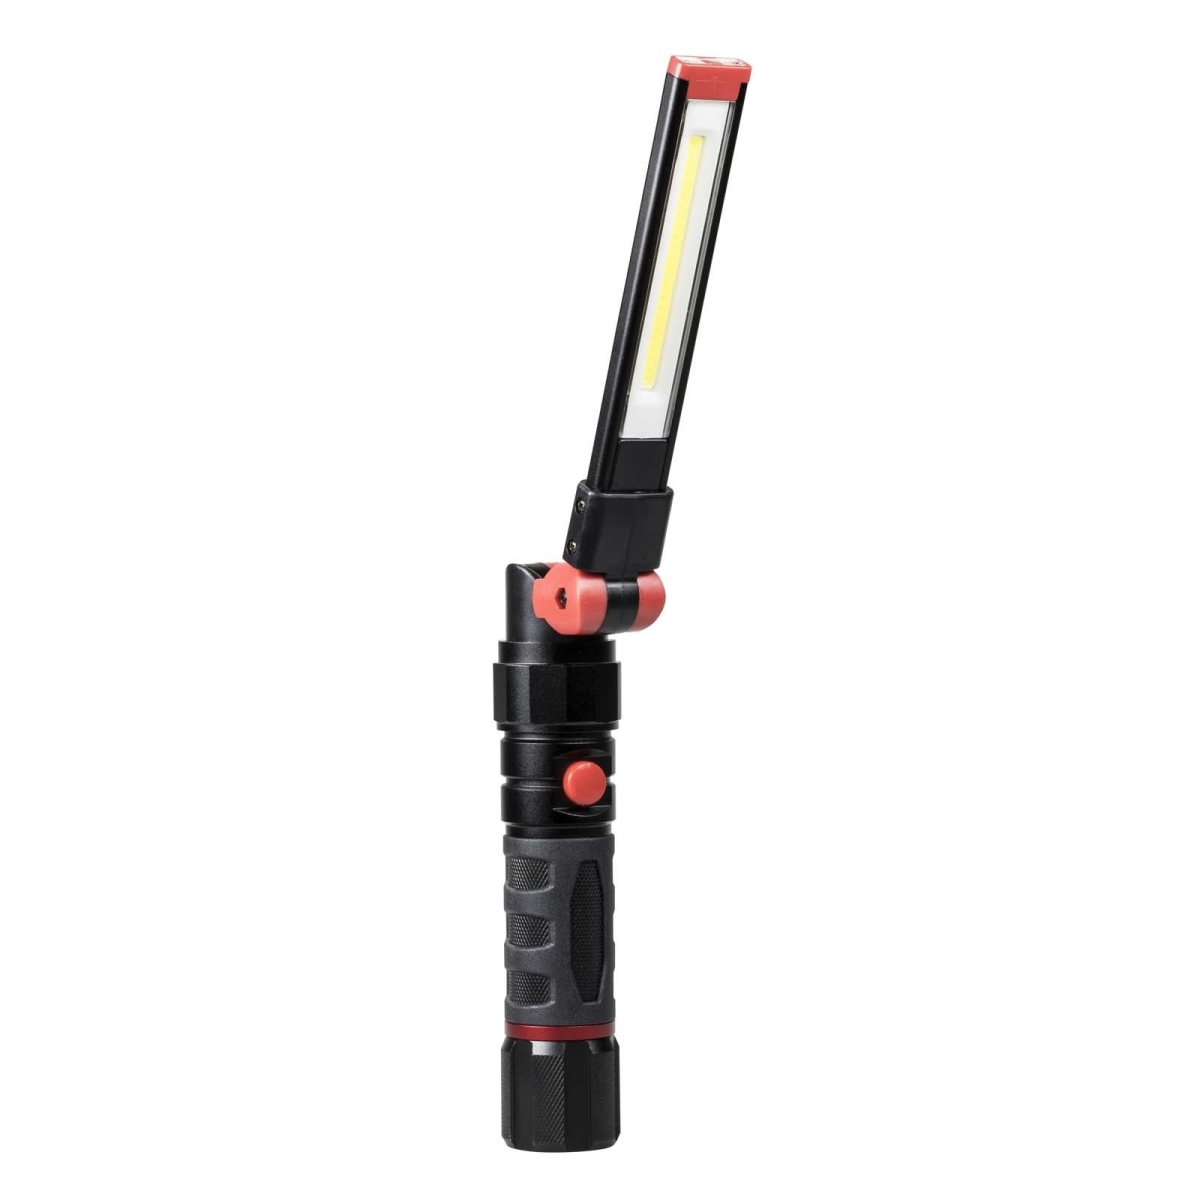 Dcy414350 Ultra Hd Series Foldable Worklight & Flashlight - Black & Red